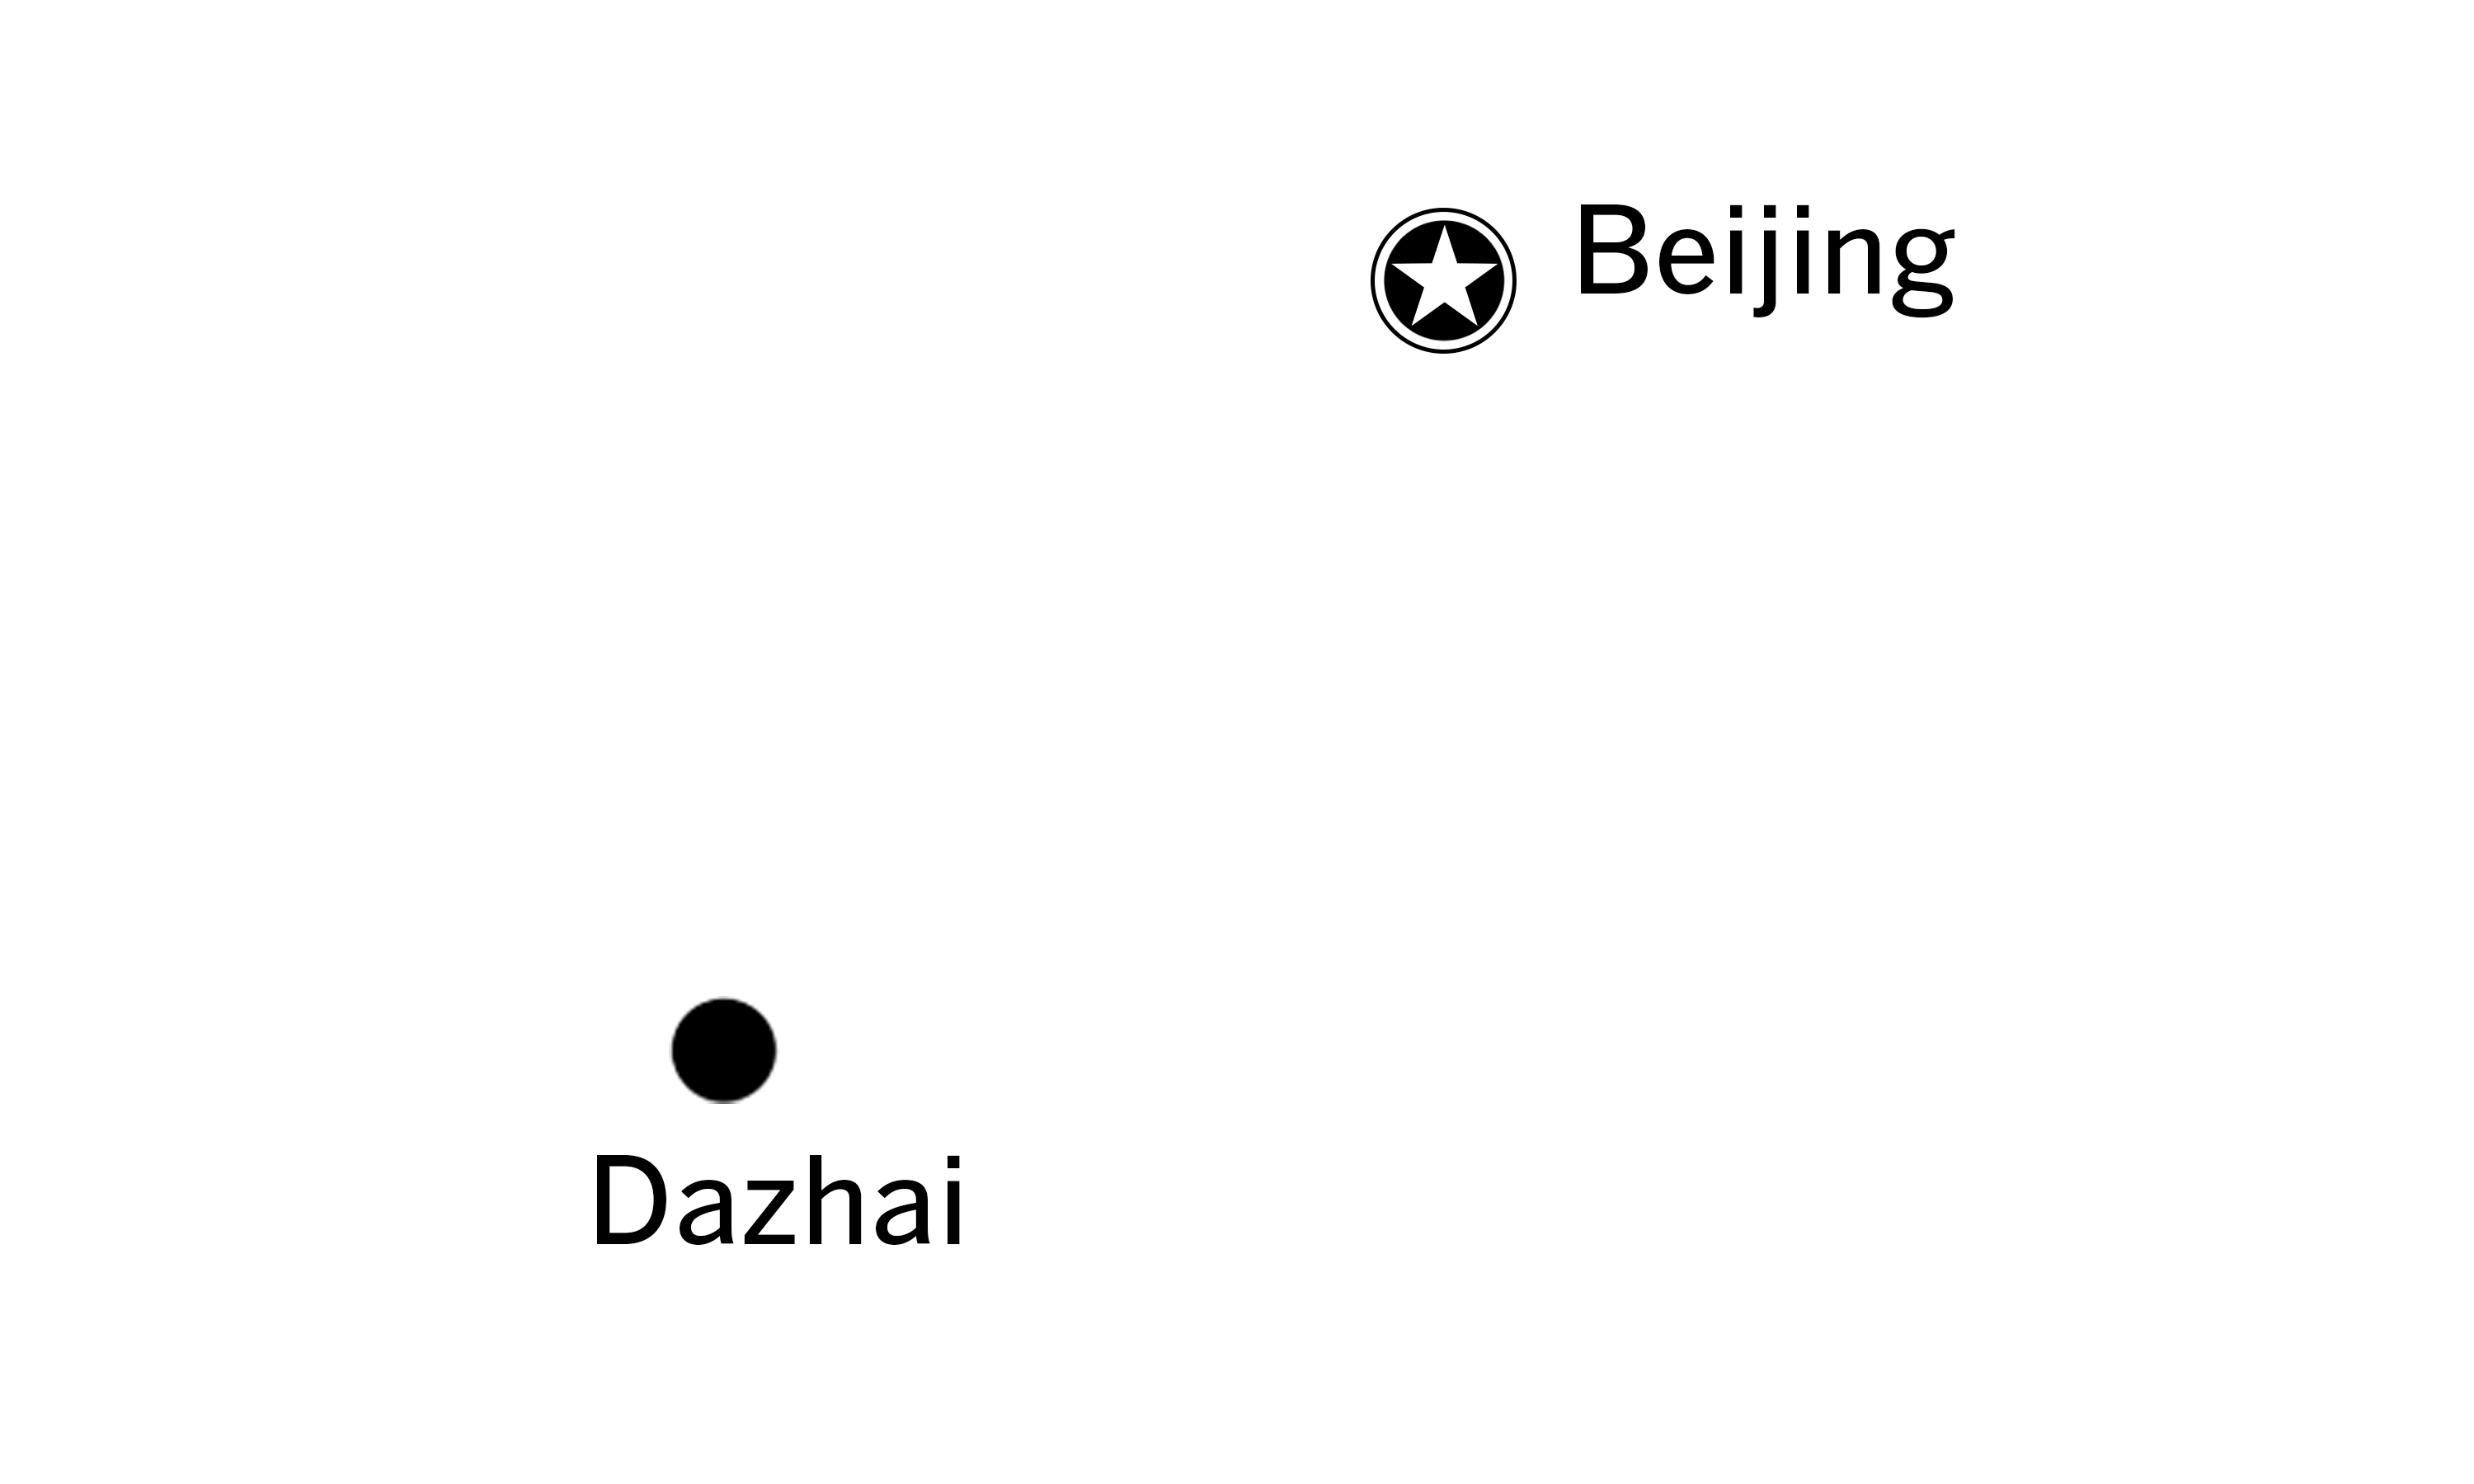 Animated illustration of the path between Beijing and Dazhai